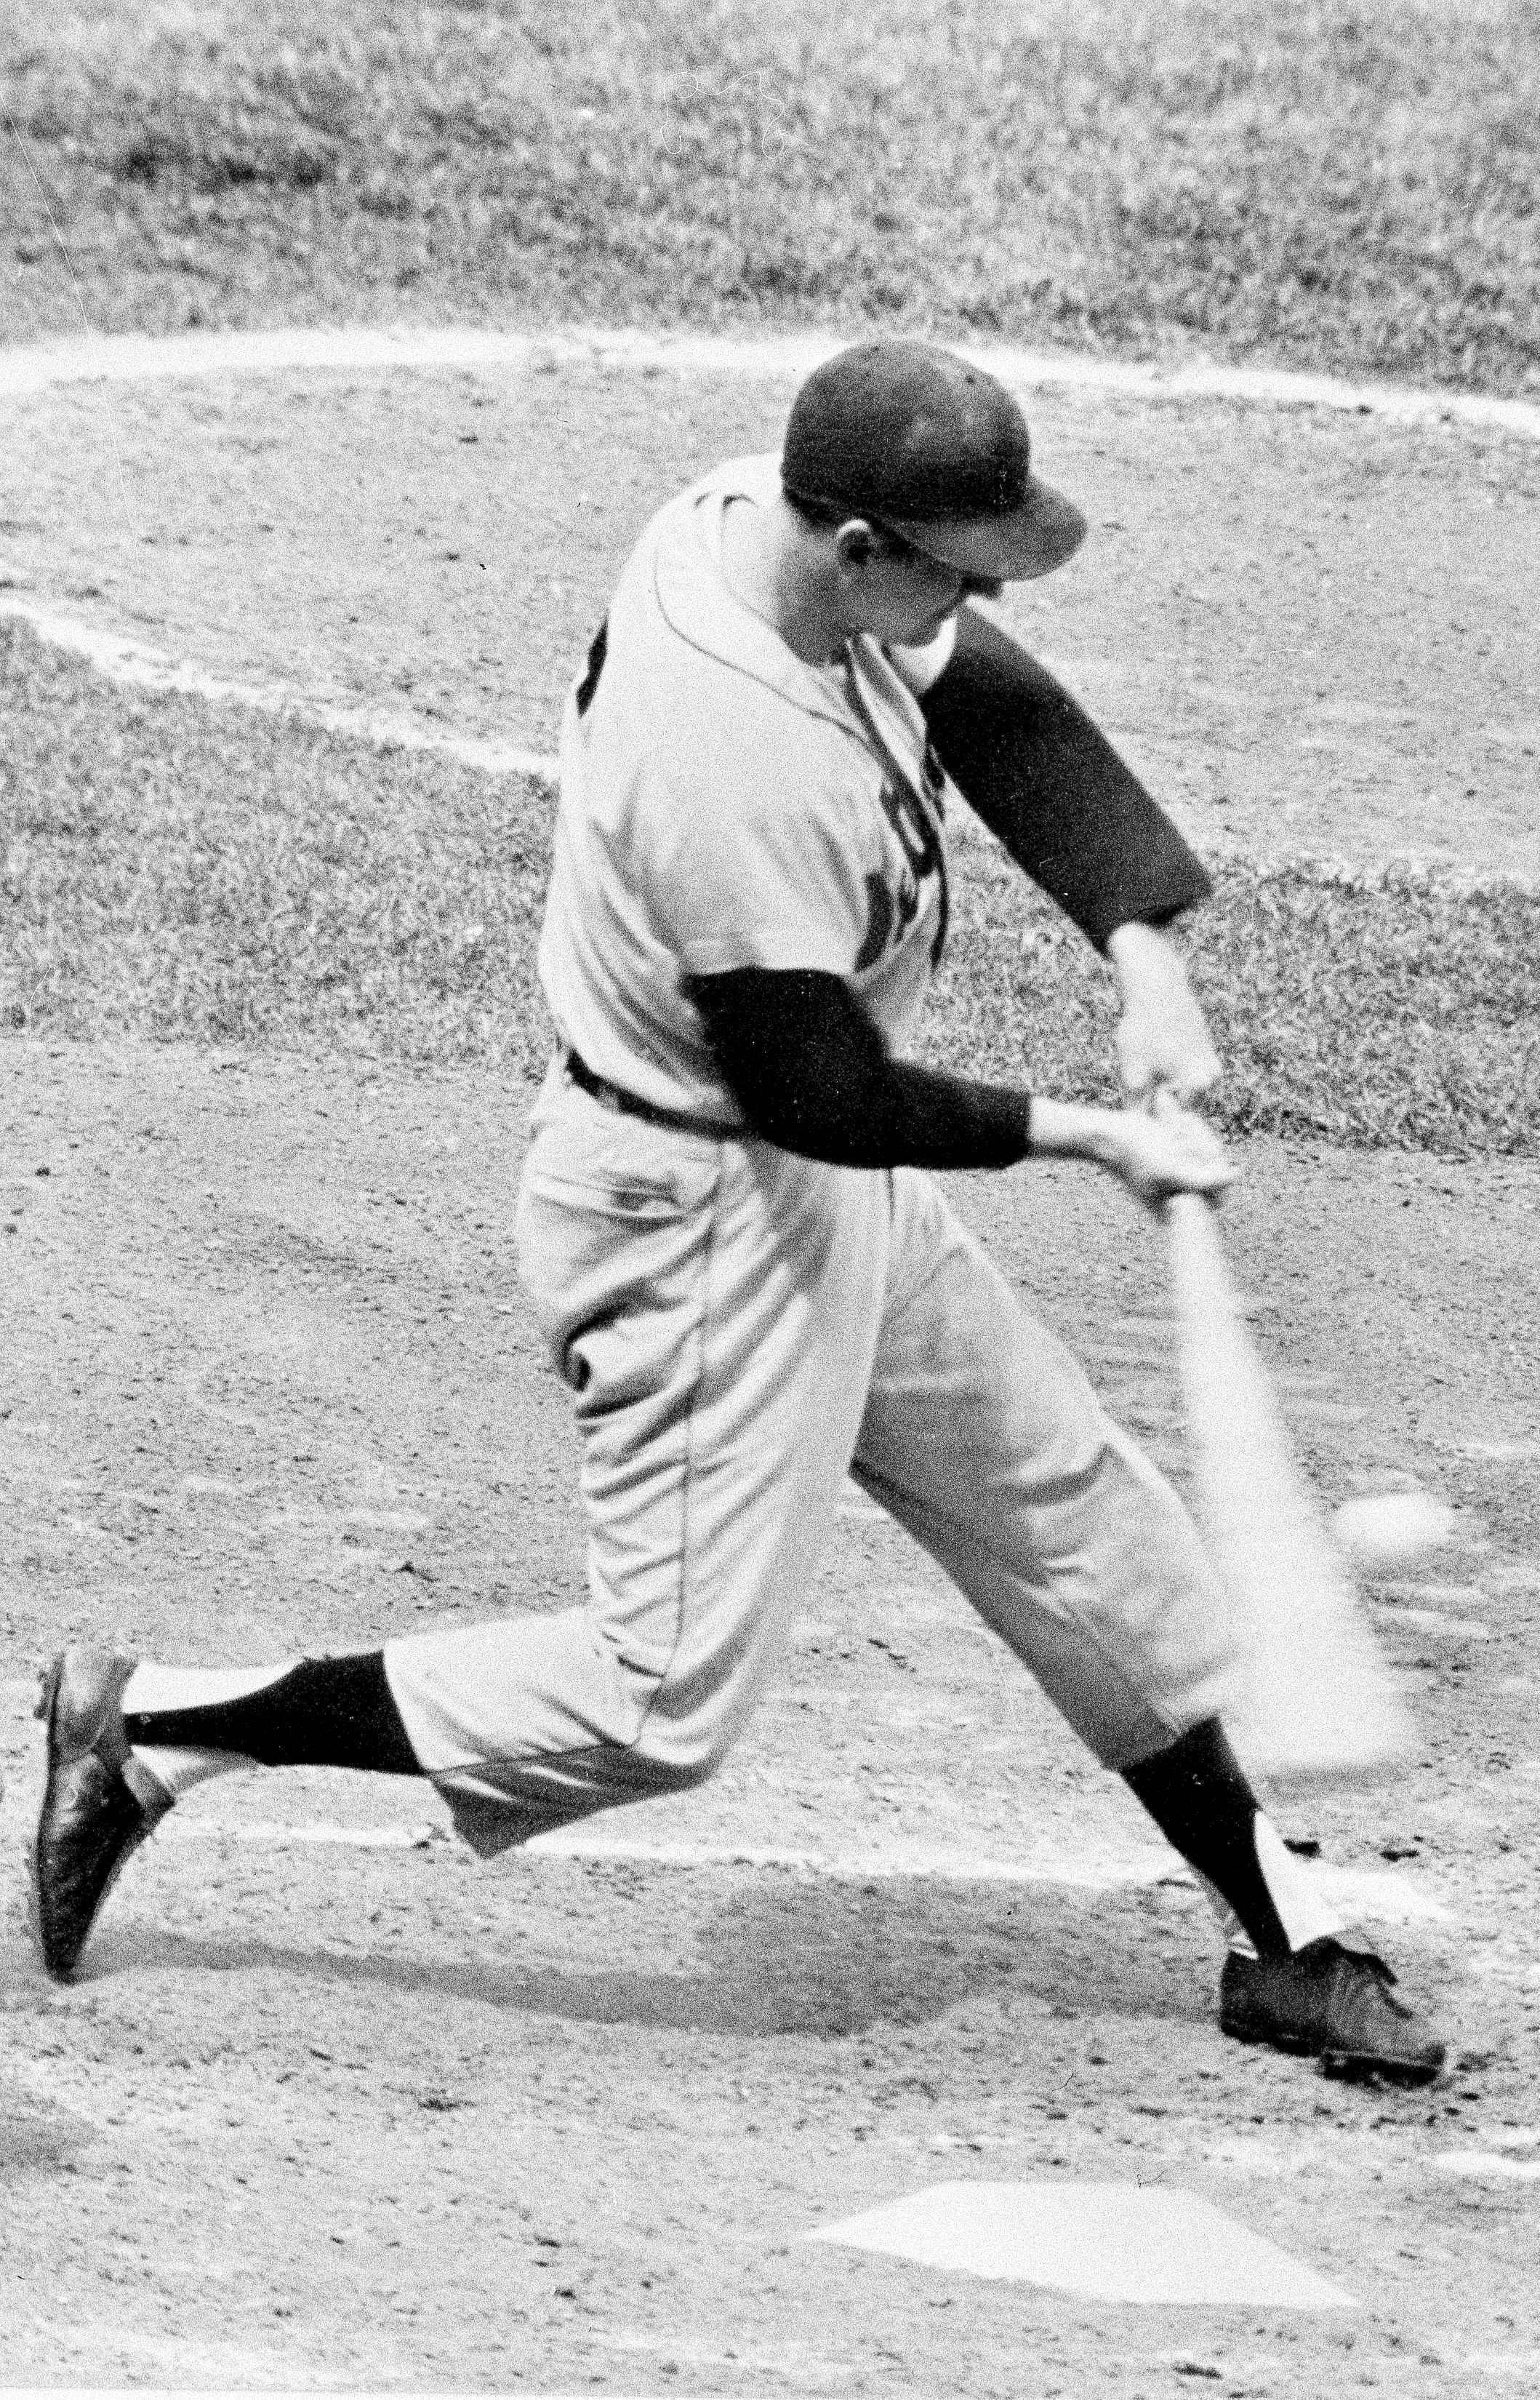 Detroit Tigers outfielder Al Kaline connects with the ball as he takes batting practice at the first day of spring training for the Tigers at Lakeland, Fla., Feb. 24, 1968. Kaline hammered out 25 home runs last season and hit .308. He was bothered with a fractured hand during part of the season and appeared in only 131 games.